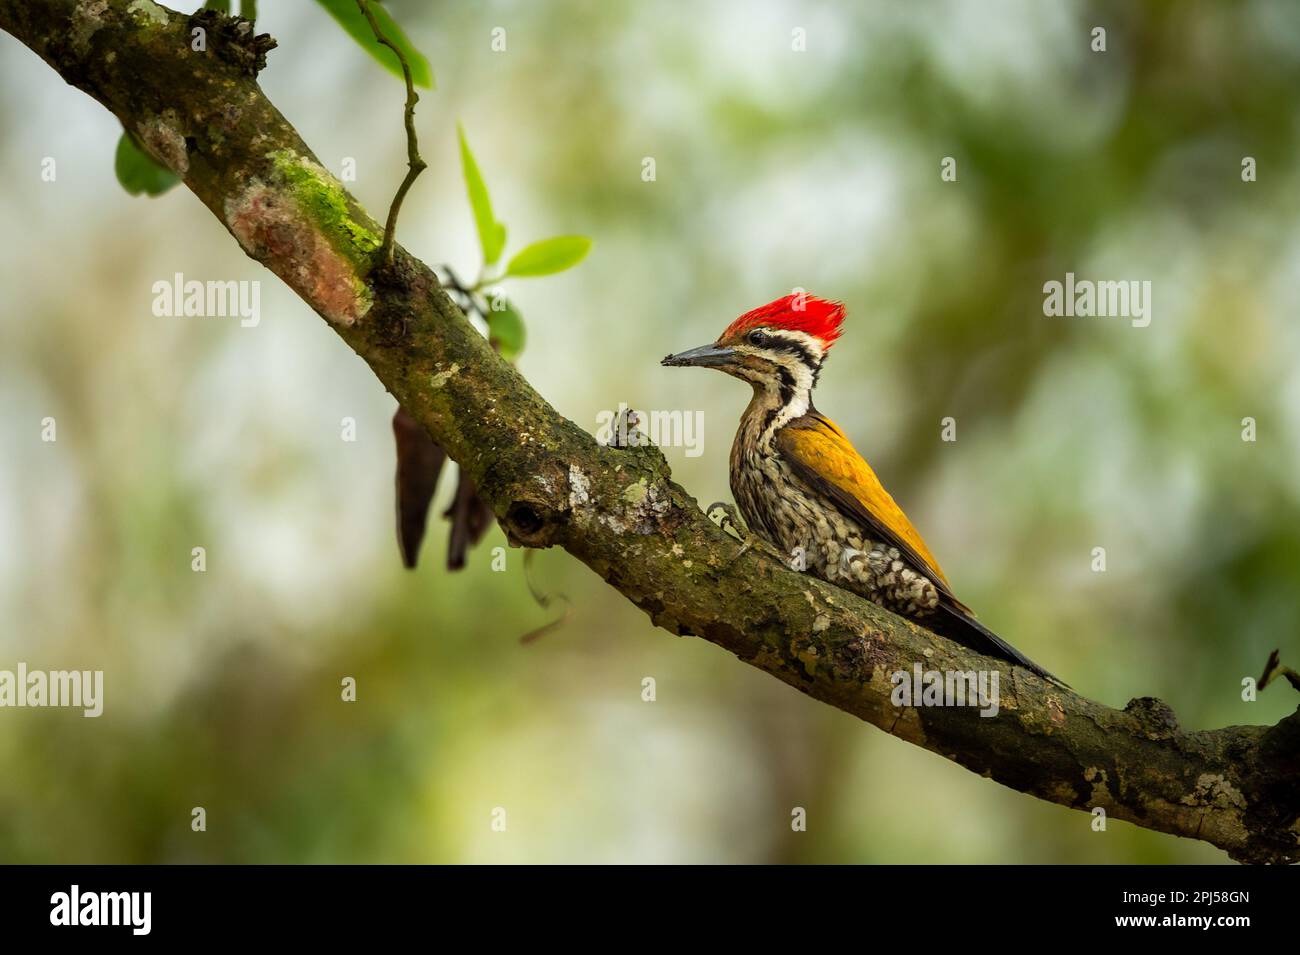 common flameback or goldenback woodpecker or three toed woodpecker or Dinopium javanense bird perch in natural scenic green background pilibhit india Stock Photo